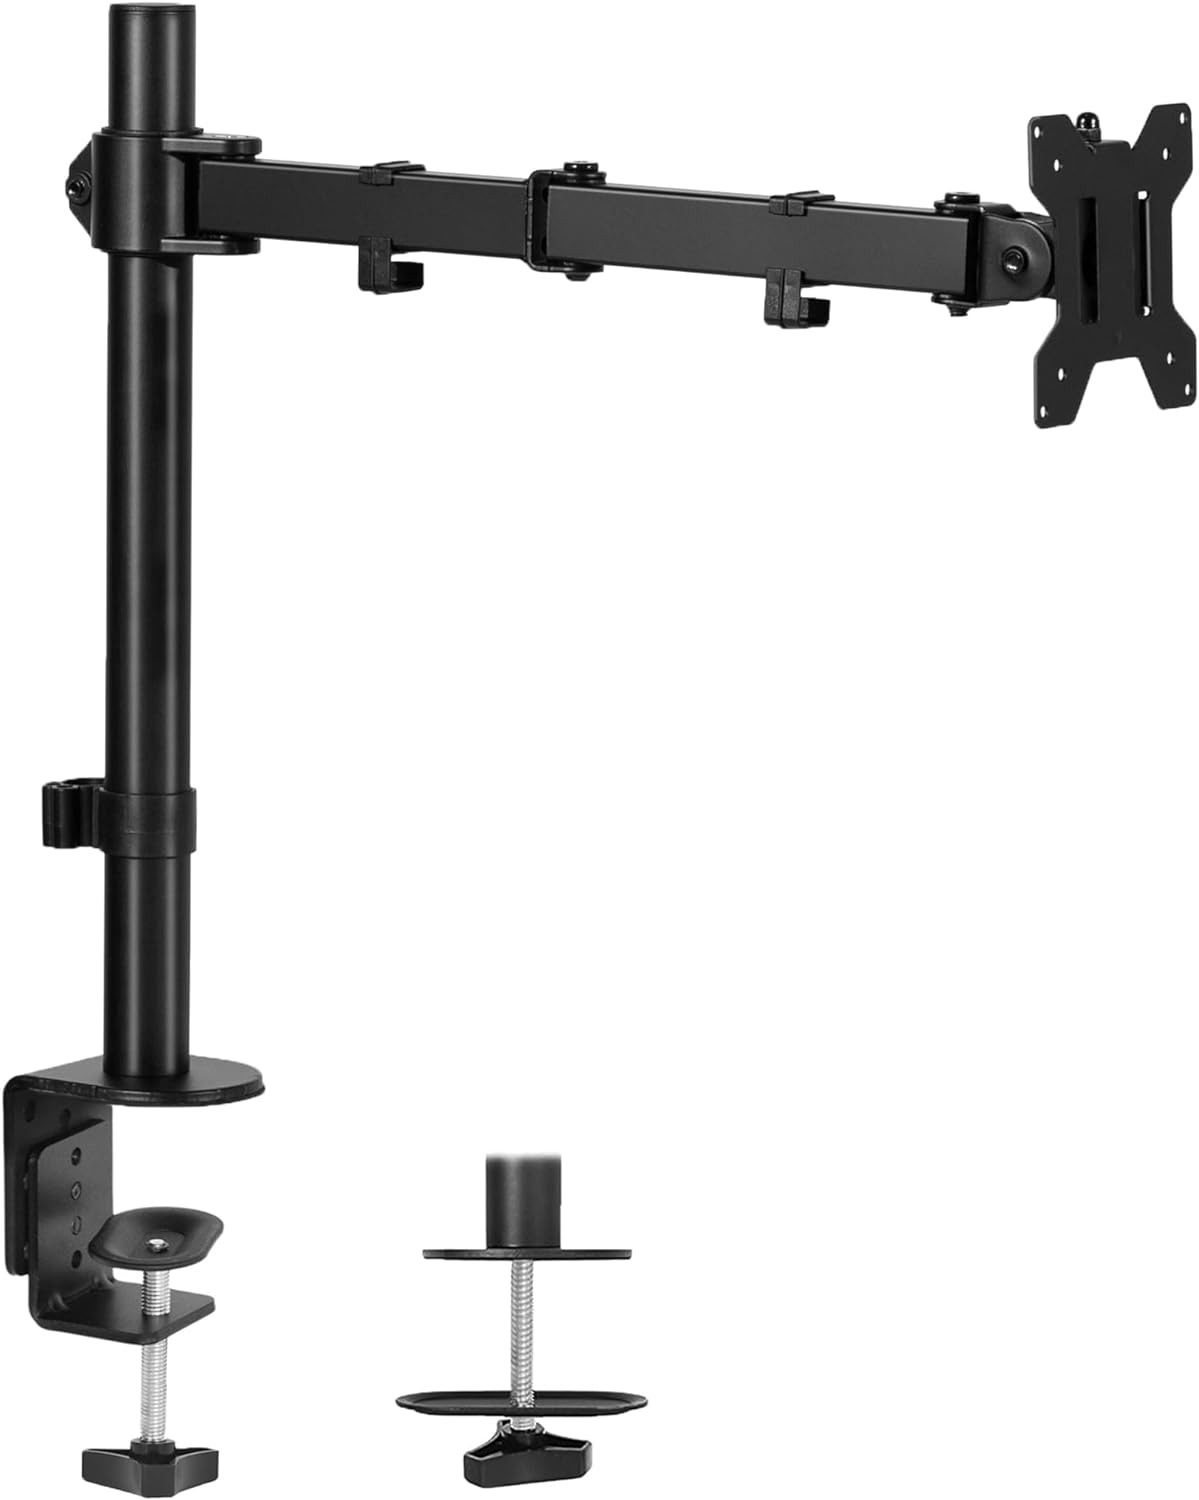 VIVO Single Monitor Arm Desk Mount, Holds Screens up to 32 inch Regular and 38